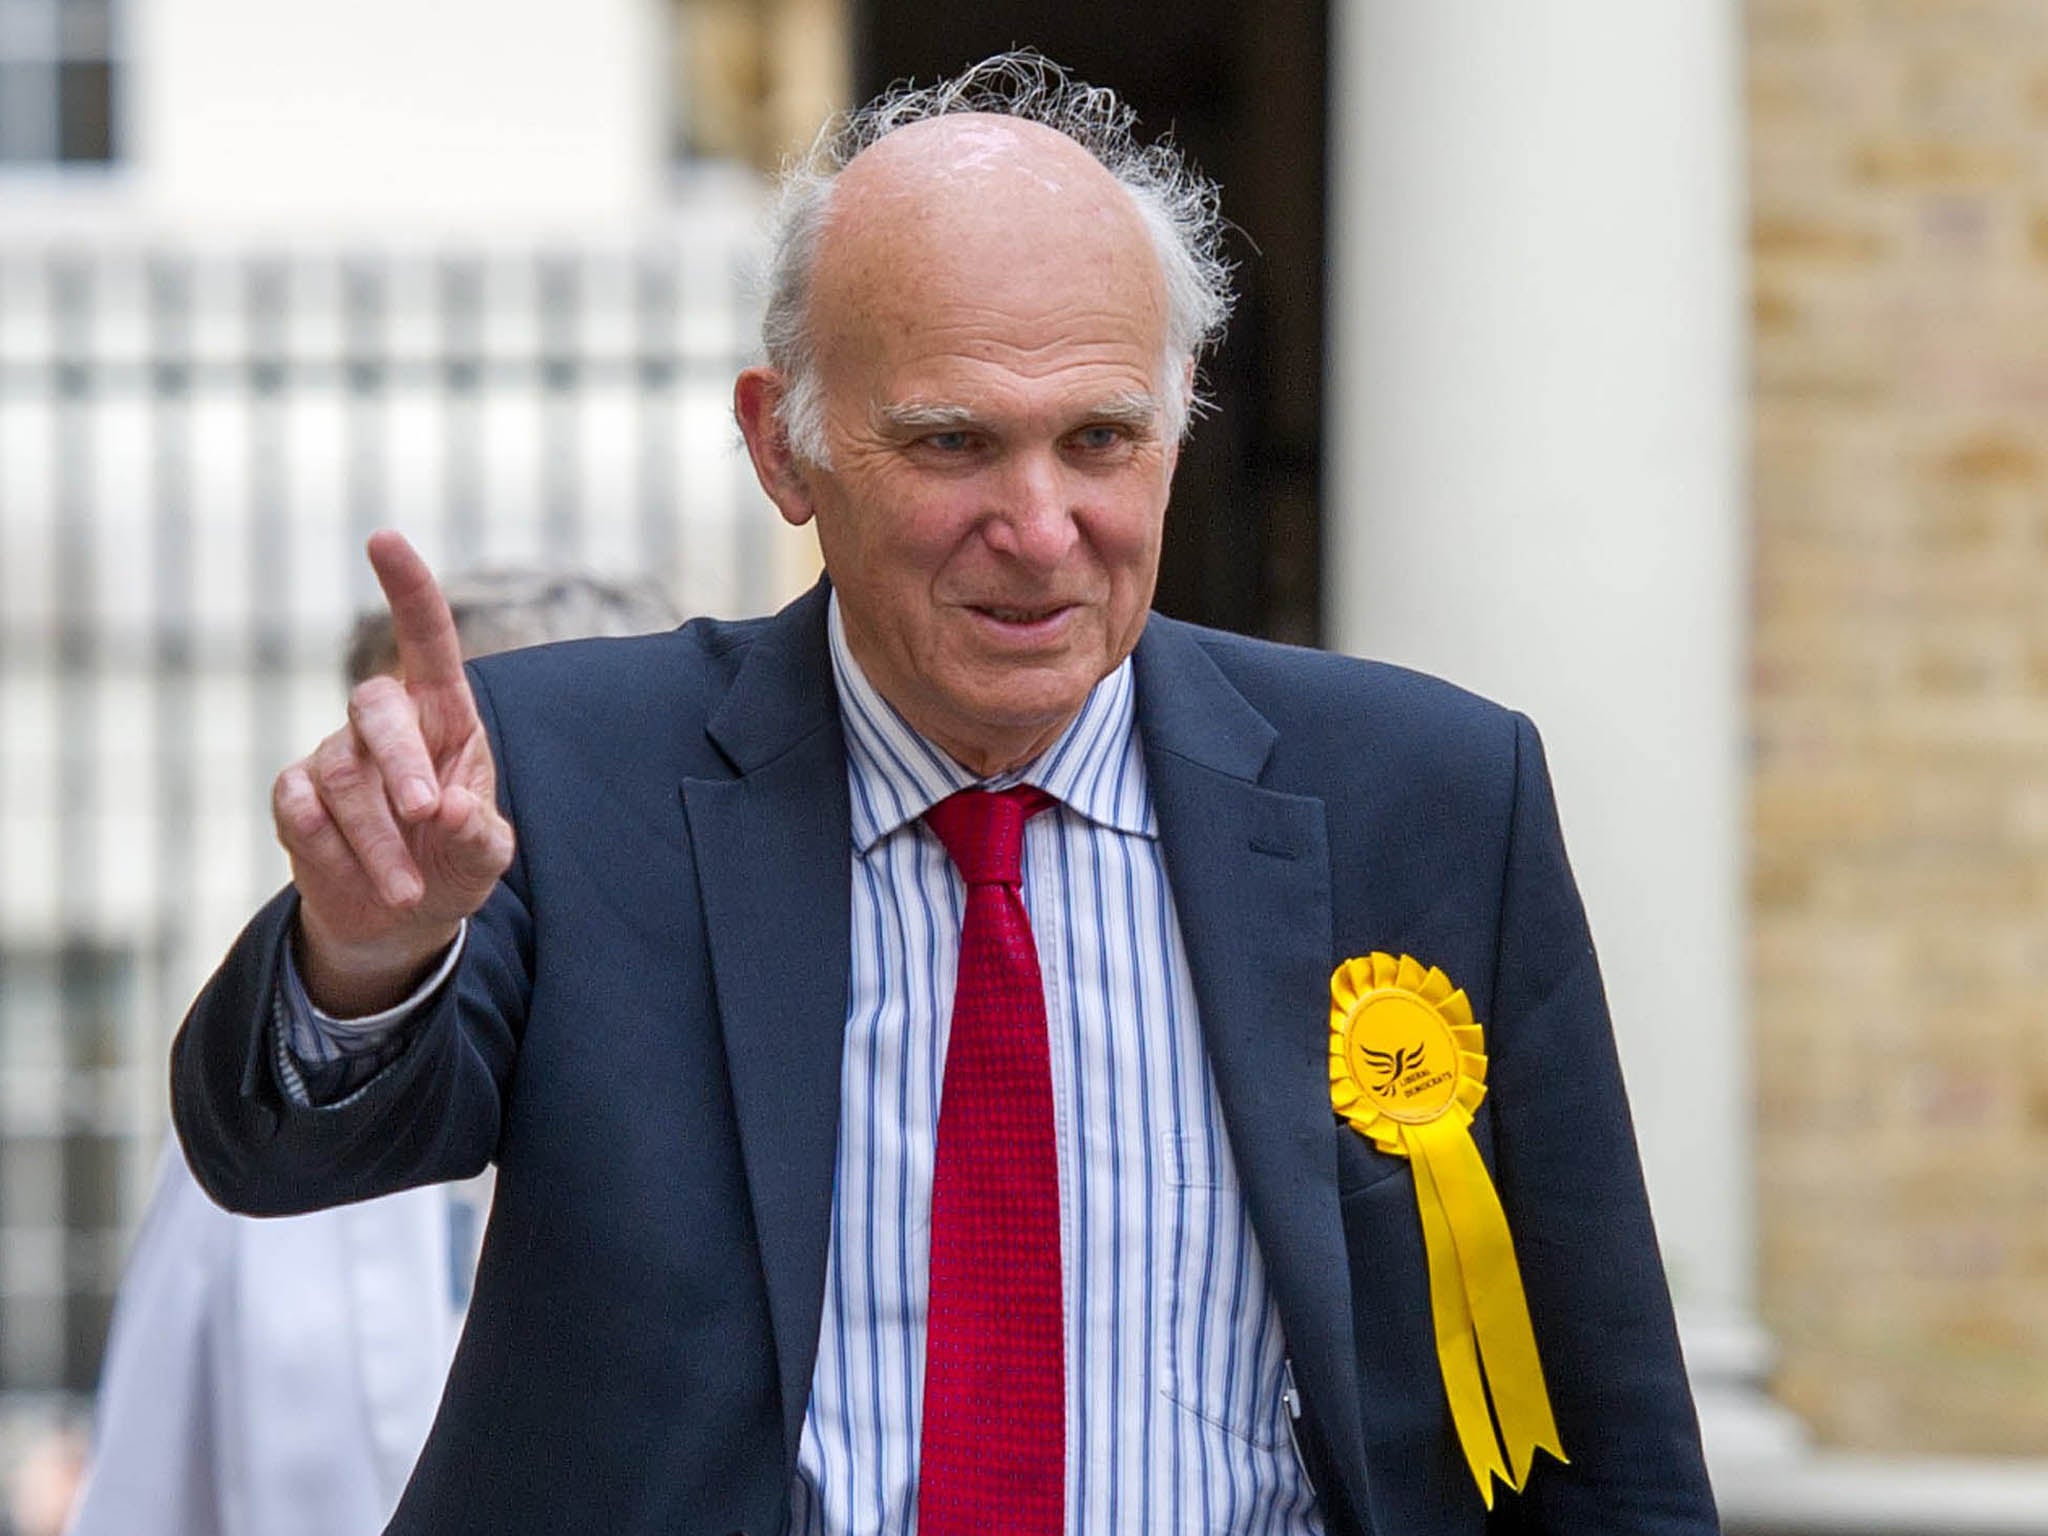 Vince Cable is seeking to become the leader of the Lib Dems